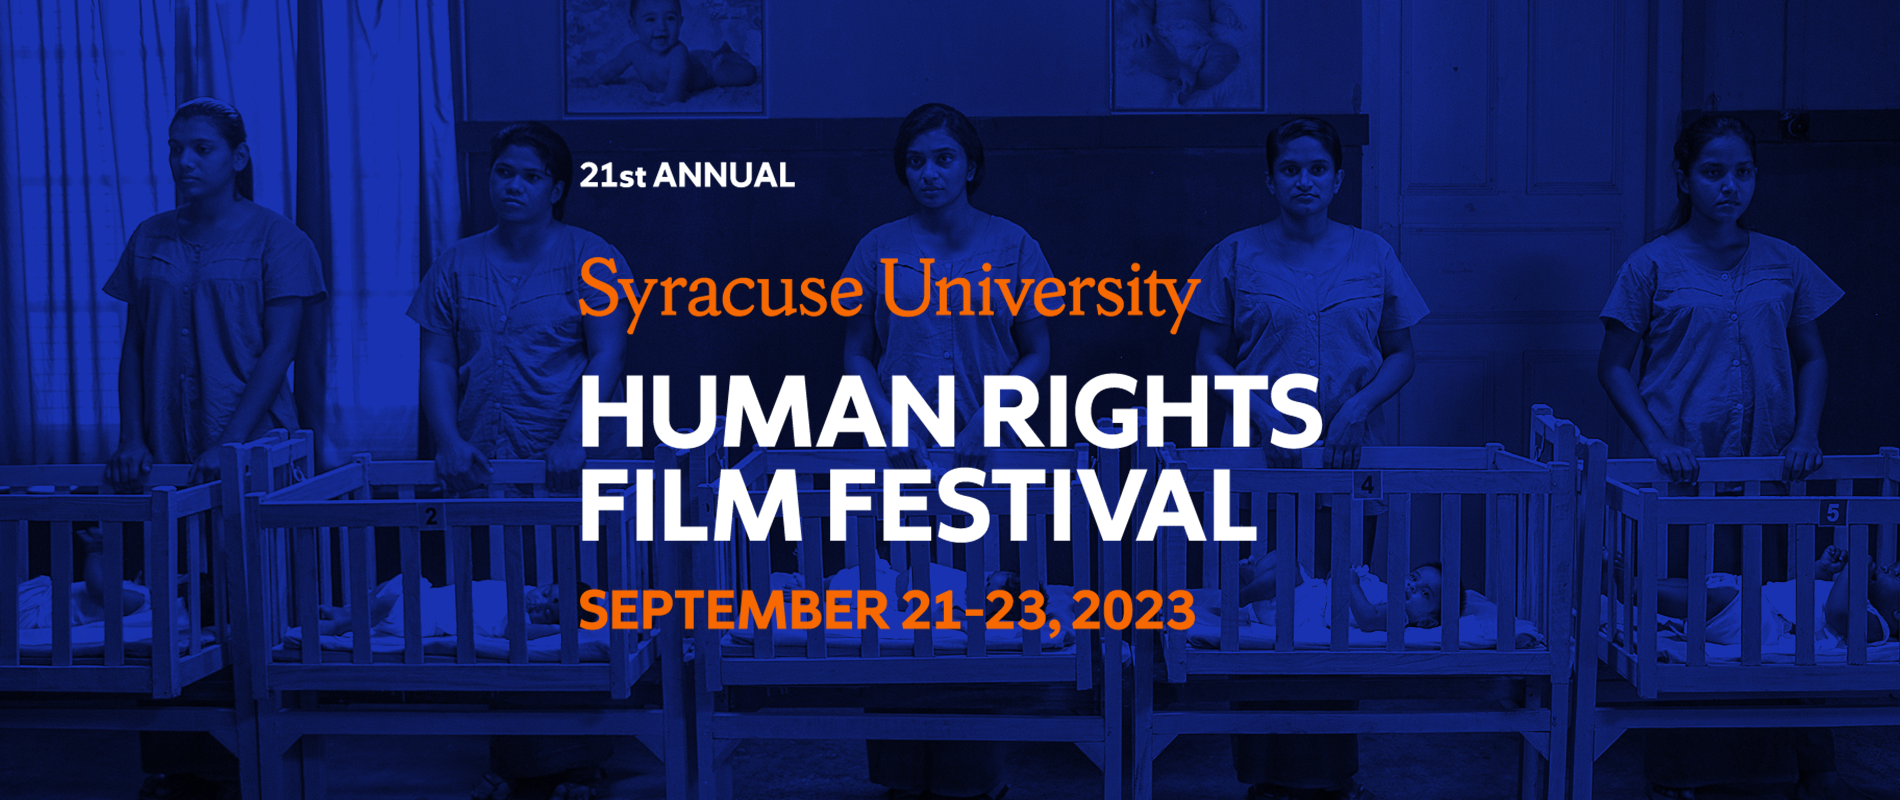 three people standing in front of cribs with babies, with words over the photo: 21st annual Syracuse University Human Rights Film Festival, September 21-23, 2023